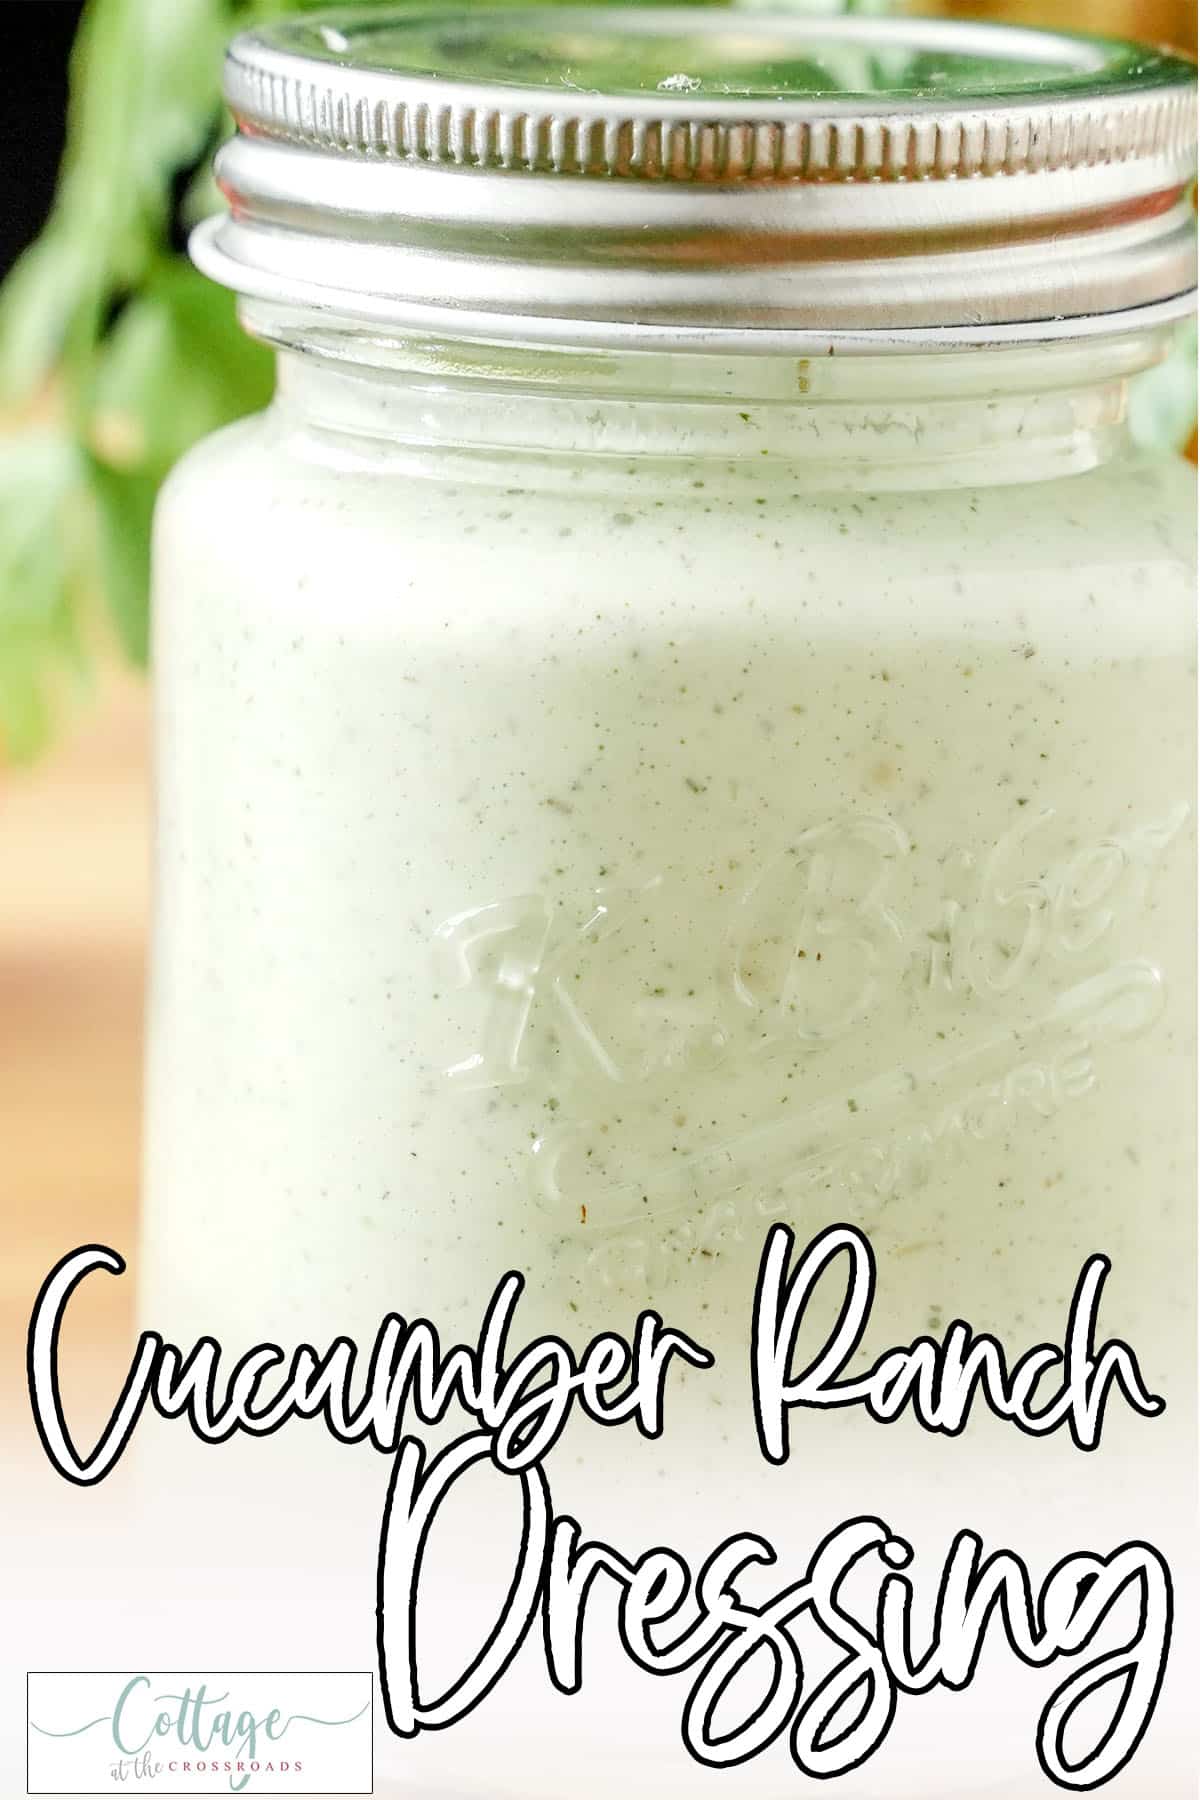 Closeup of jar of homemade ranch dressing with text which reads cucumber ranch dressing